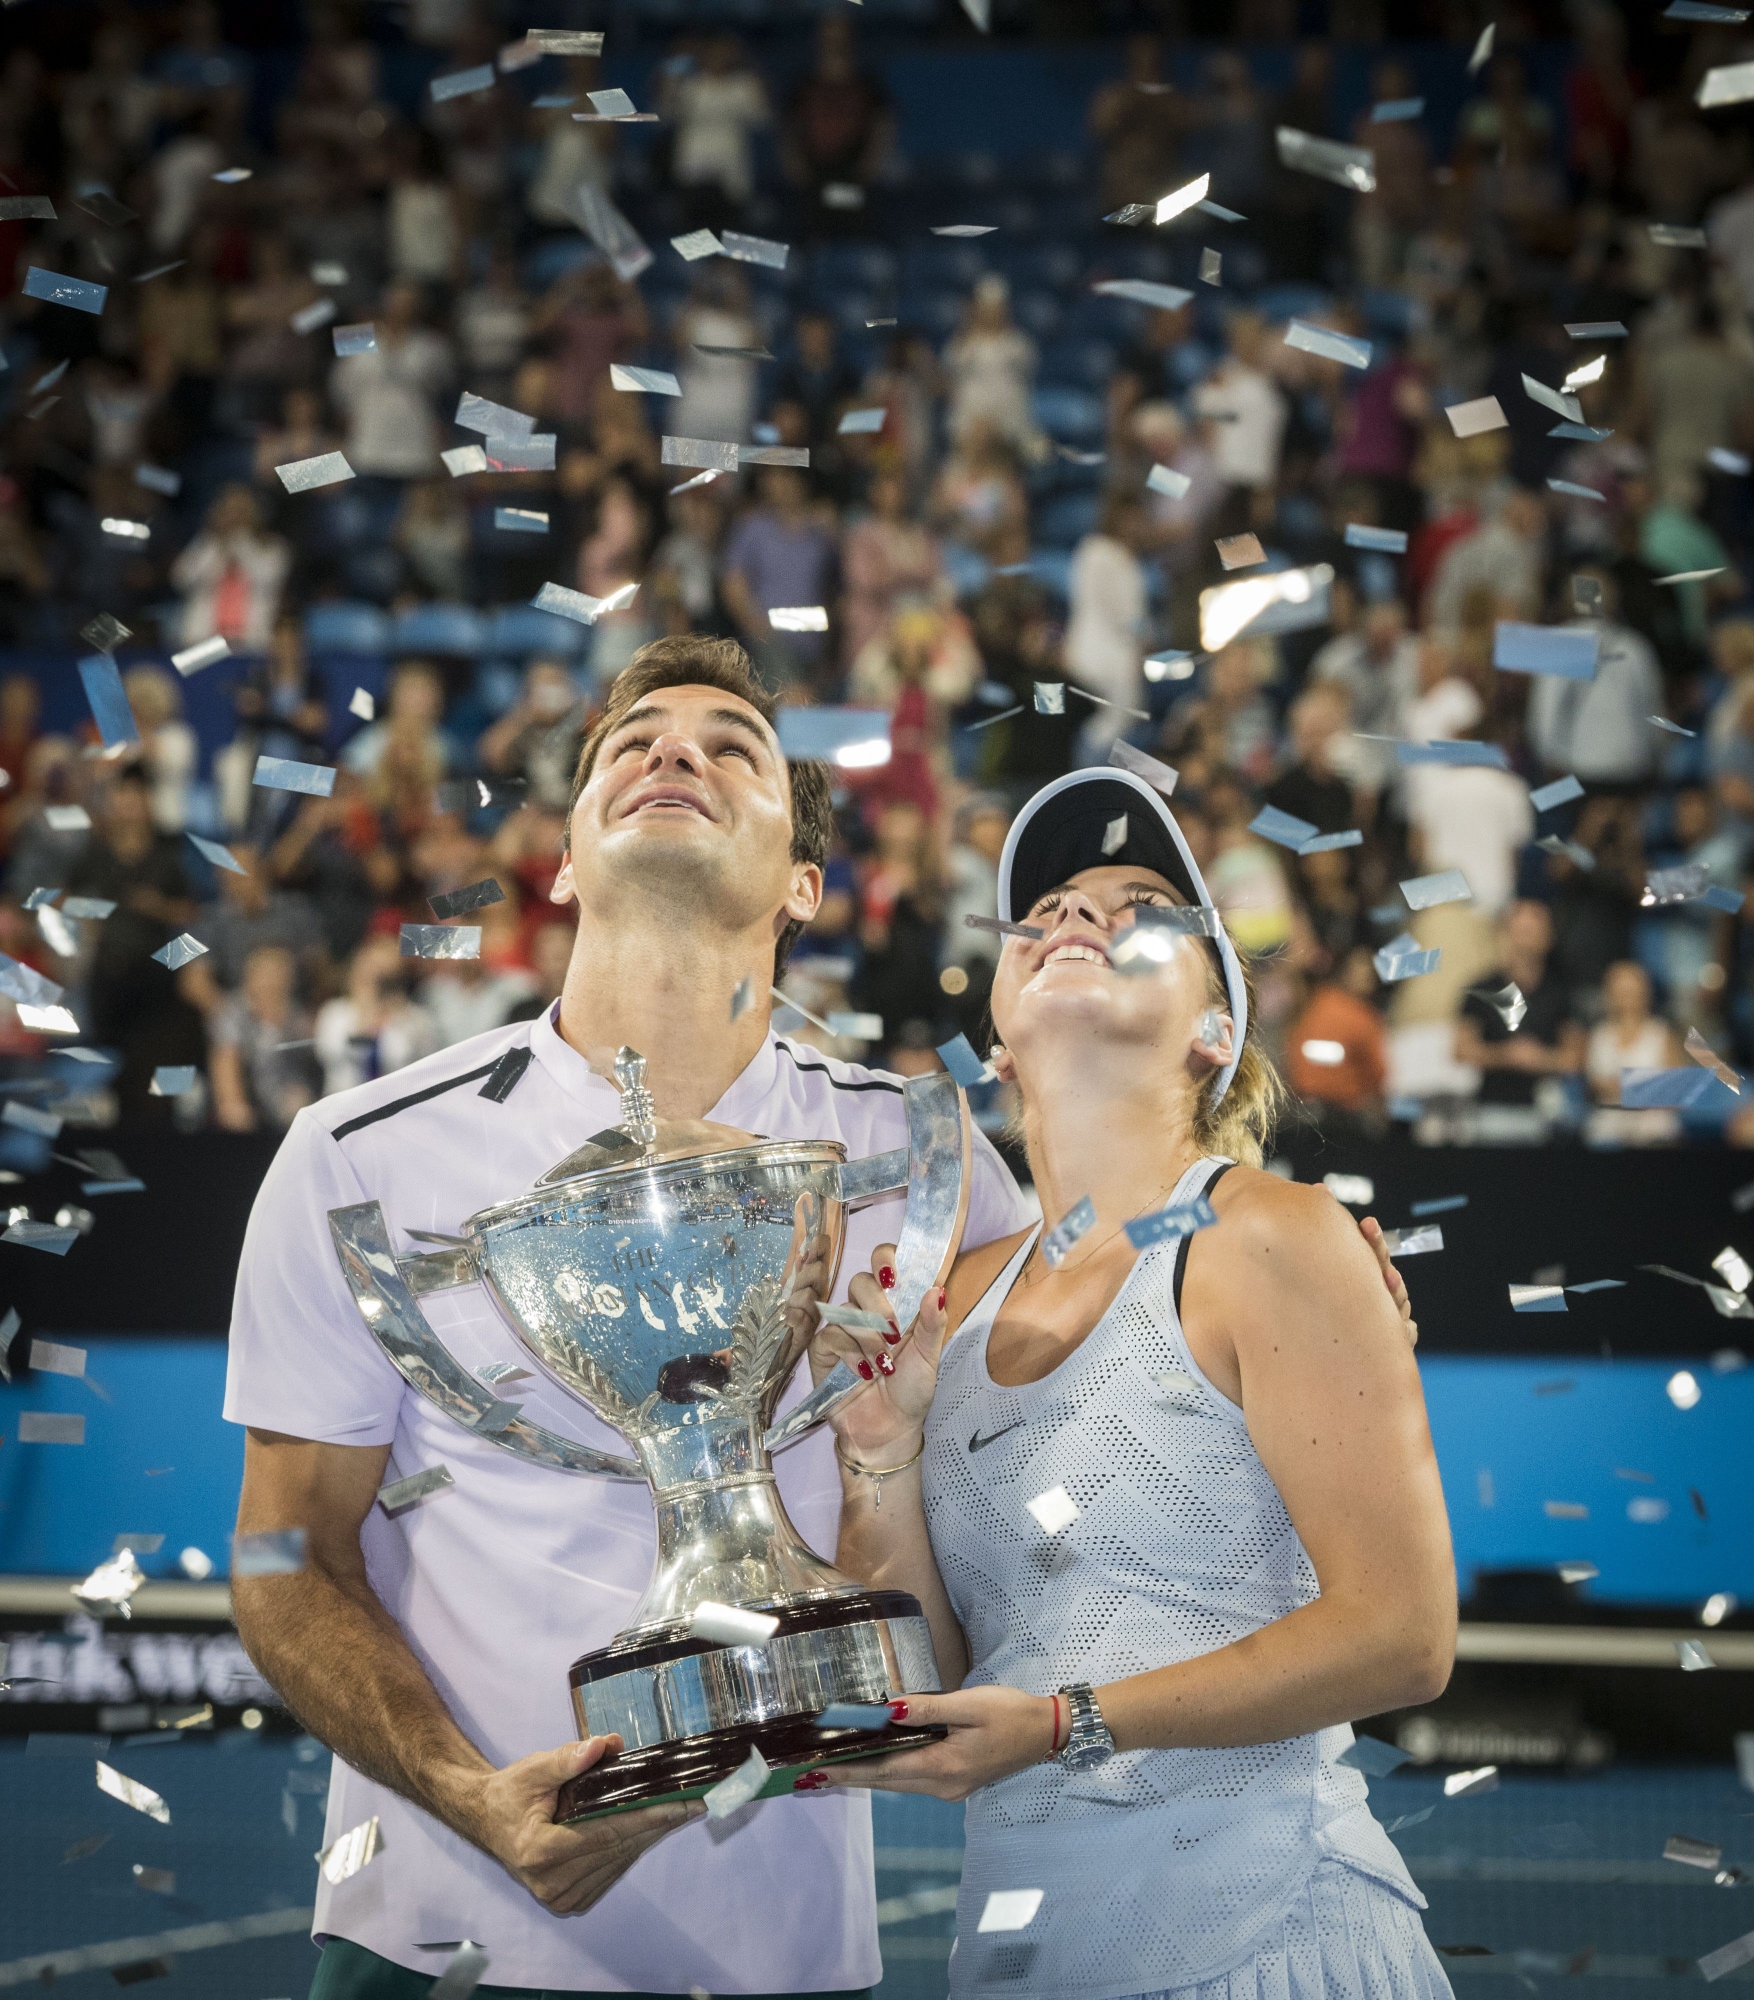 epa06420711 Roger Federer and Belinda Bencic of Switzerland celebrate their finals win with the Hopman Cup after winning on the final day of the Hopman Cup final between Switzerland and Germany at the Perth Arena in Perth, Australia, 06 January 2018.  EPA/TONY MCDONOUGH AUSTRALIA AND NEW ZEALAND OUT  EDITORIAL USE ONLY  EDITORIAL USE ONLY  EDITORIAL USE ONLY  EDITORIAL USE ONLY  EDITORIAL USE ONLY AUSTRALIA TENNIS HOPMAN CUP